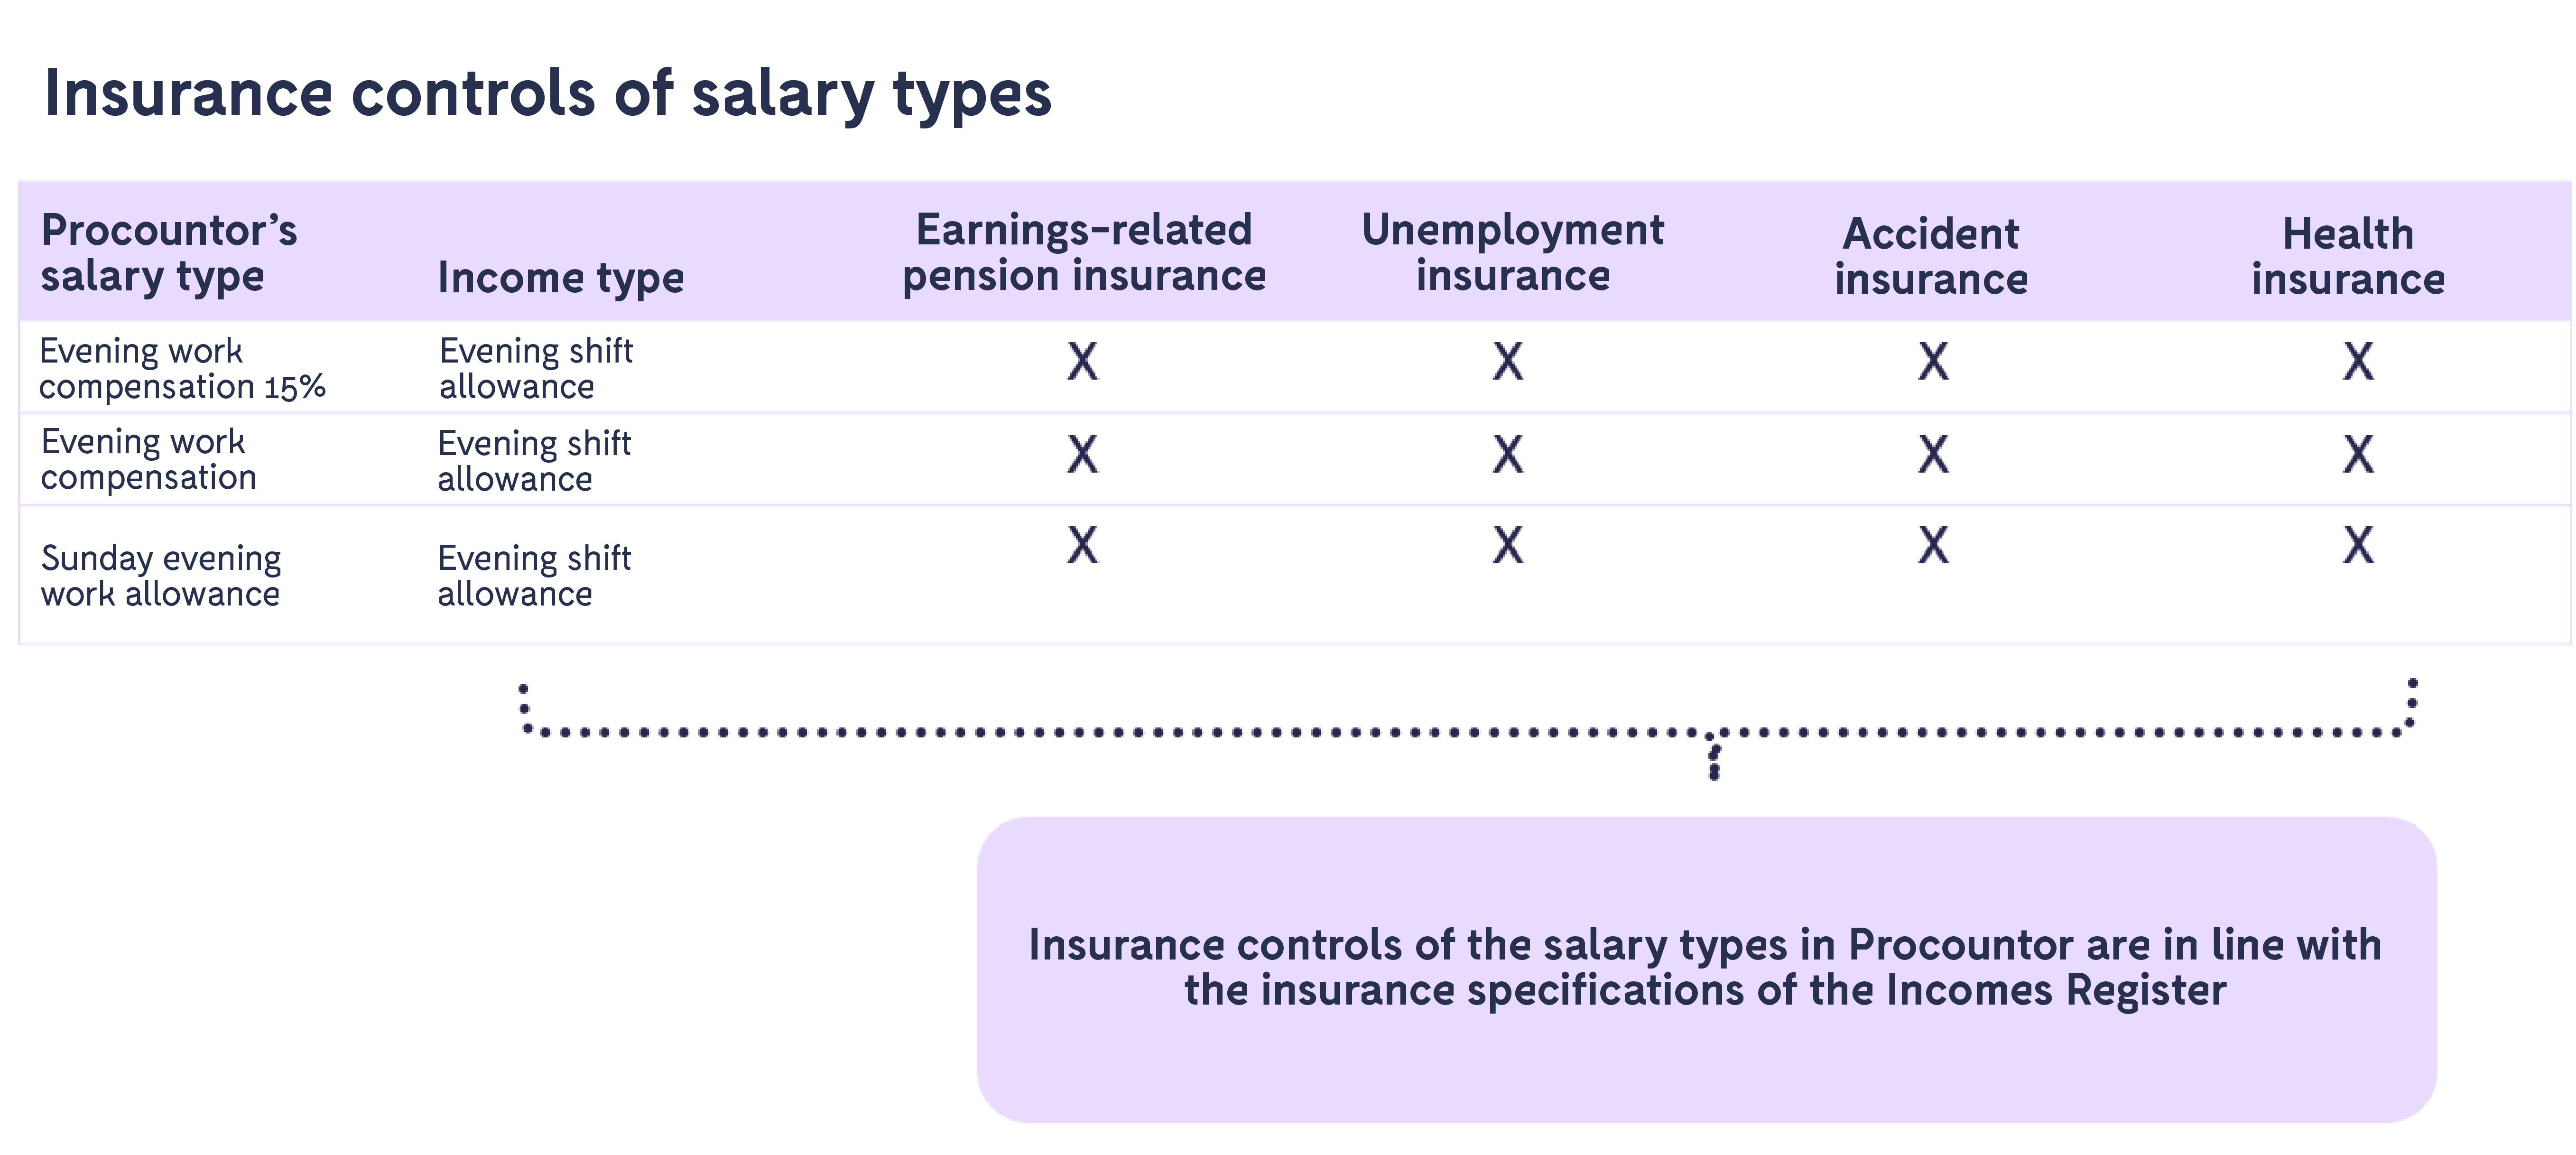 The_controls_of_insurance_with_salary_types_1.png